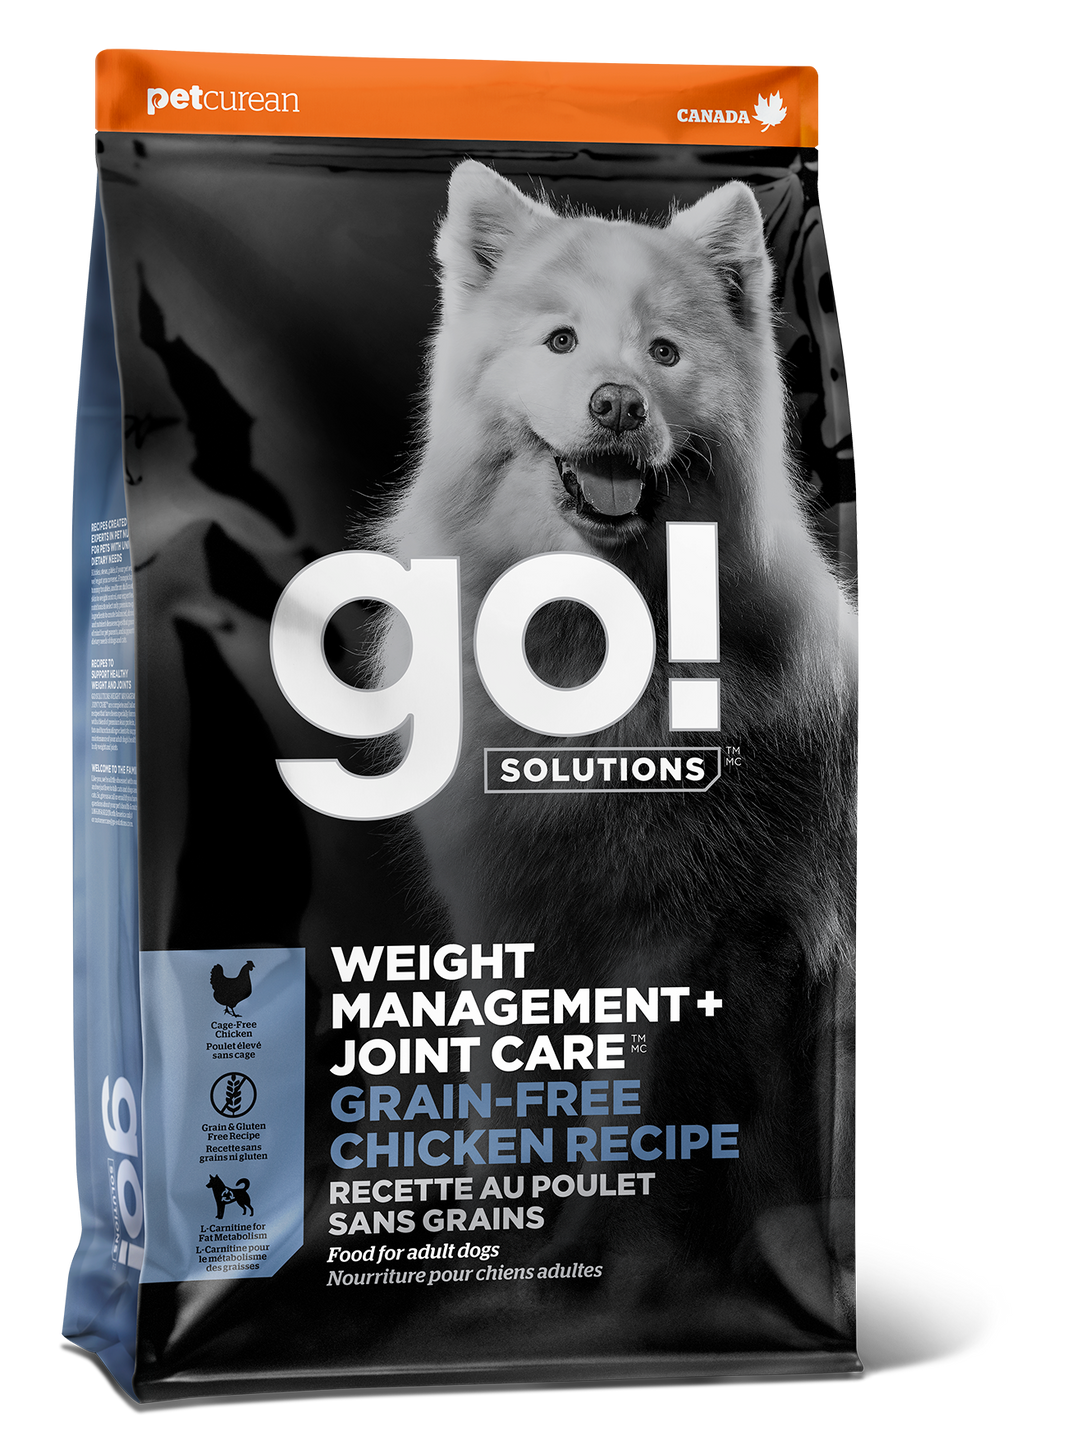 Go! Solutions Weight Management + Joint Care Grain-Free Chicken Recipe Dog Food